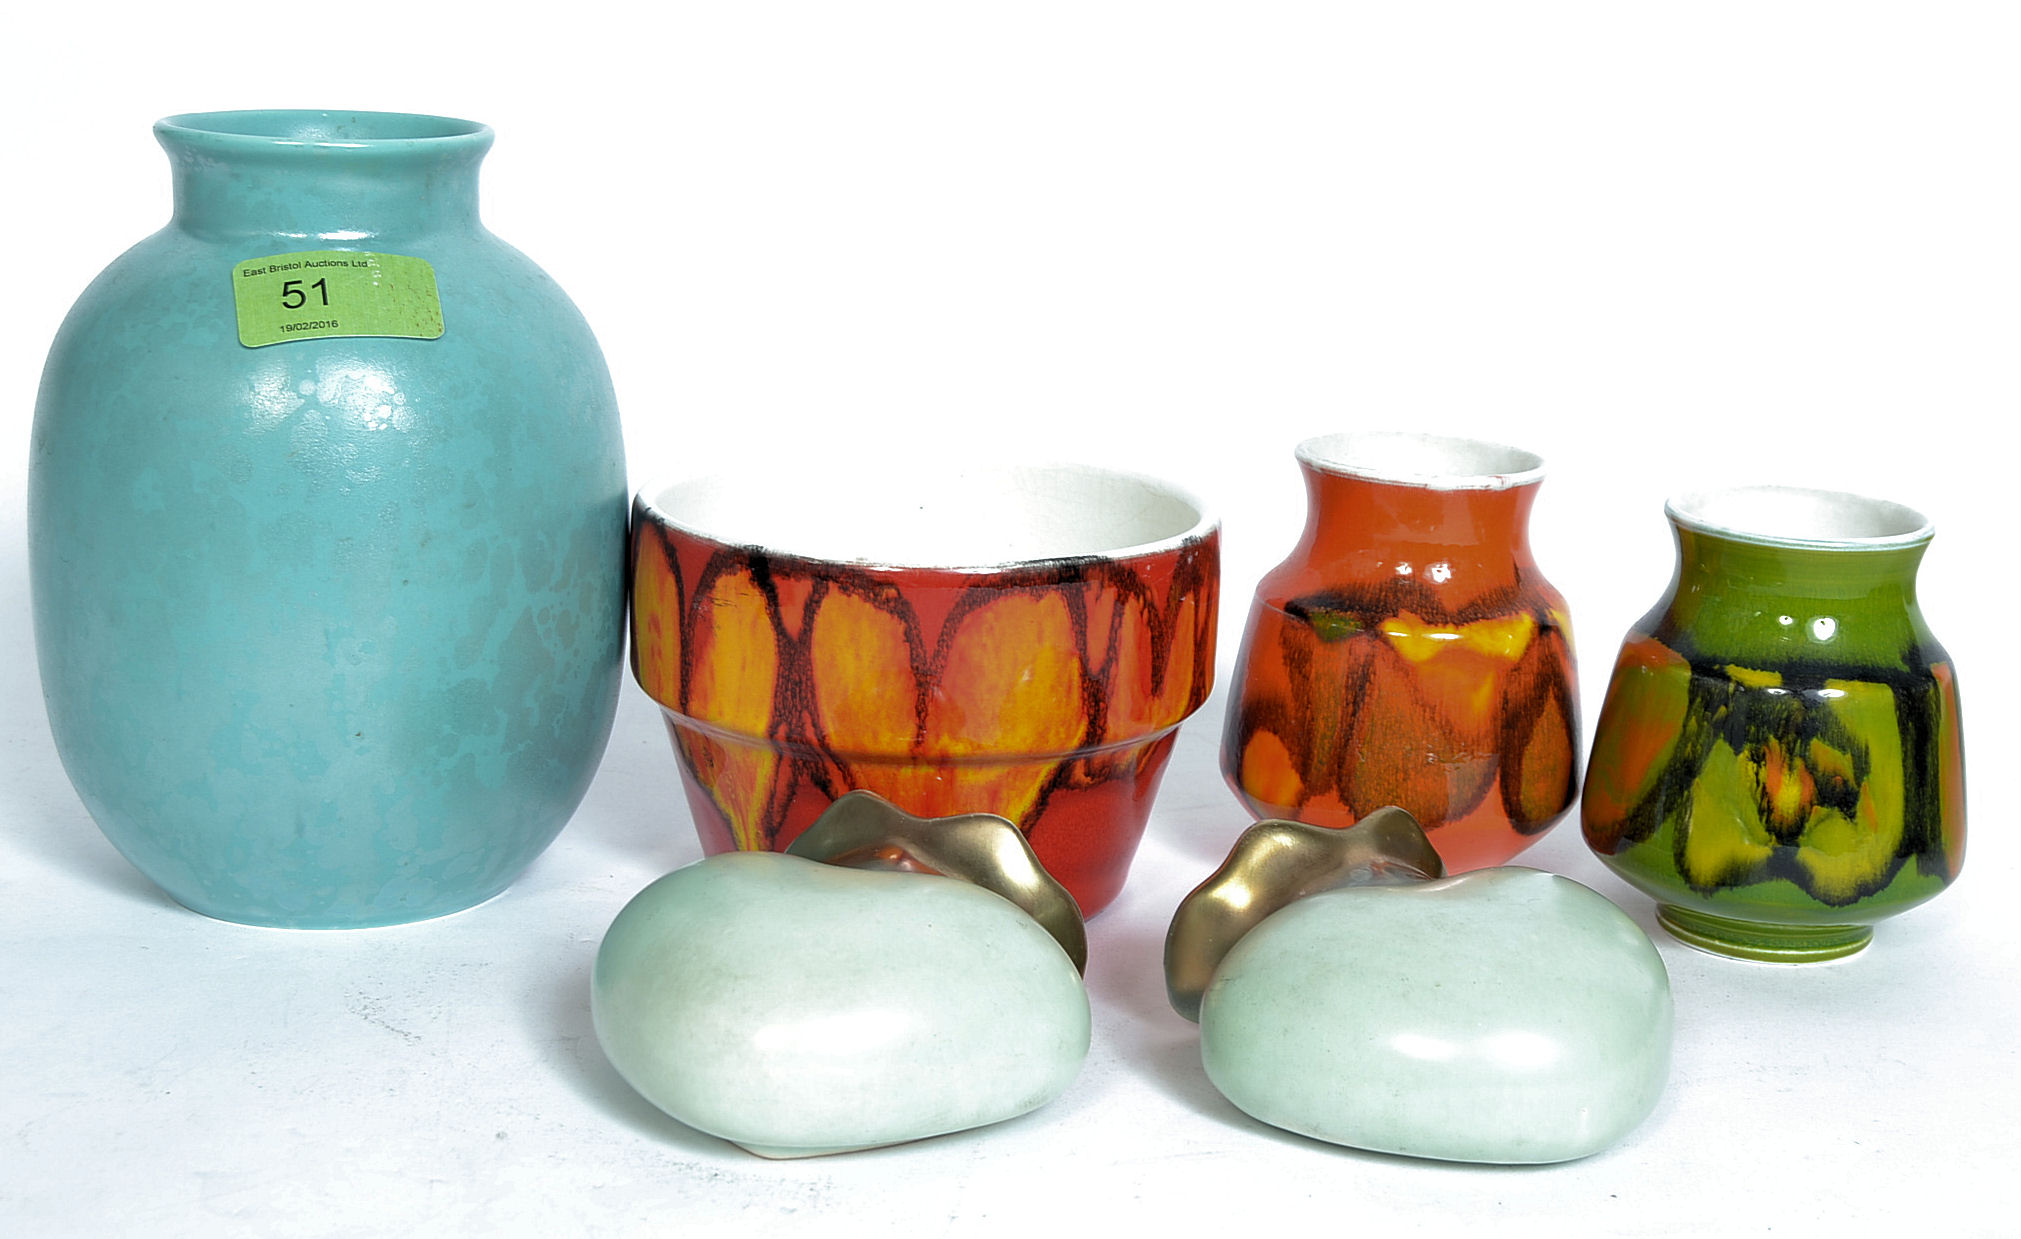 A collection of retro and vintage Poole pottery dating from the earlier part of the 20th century